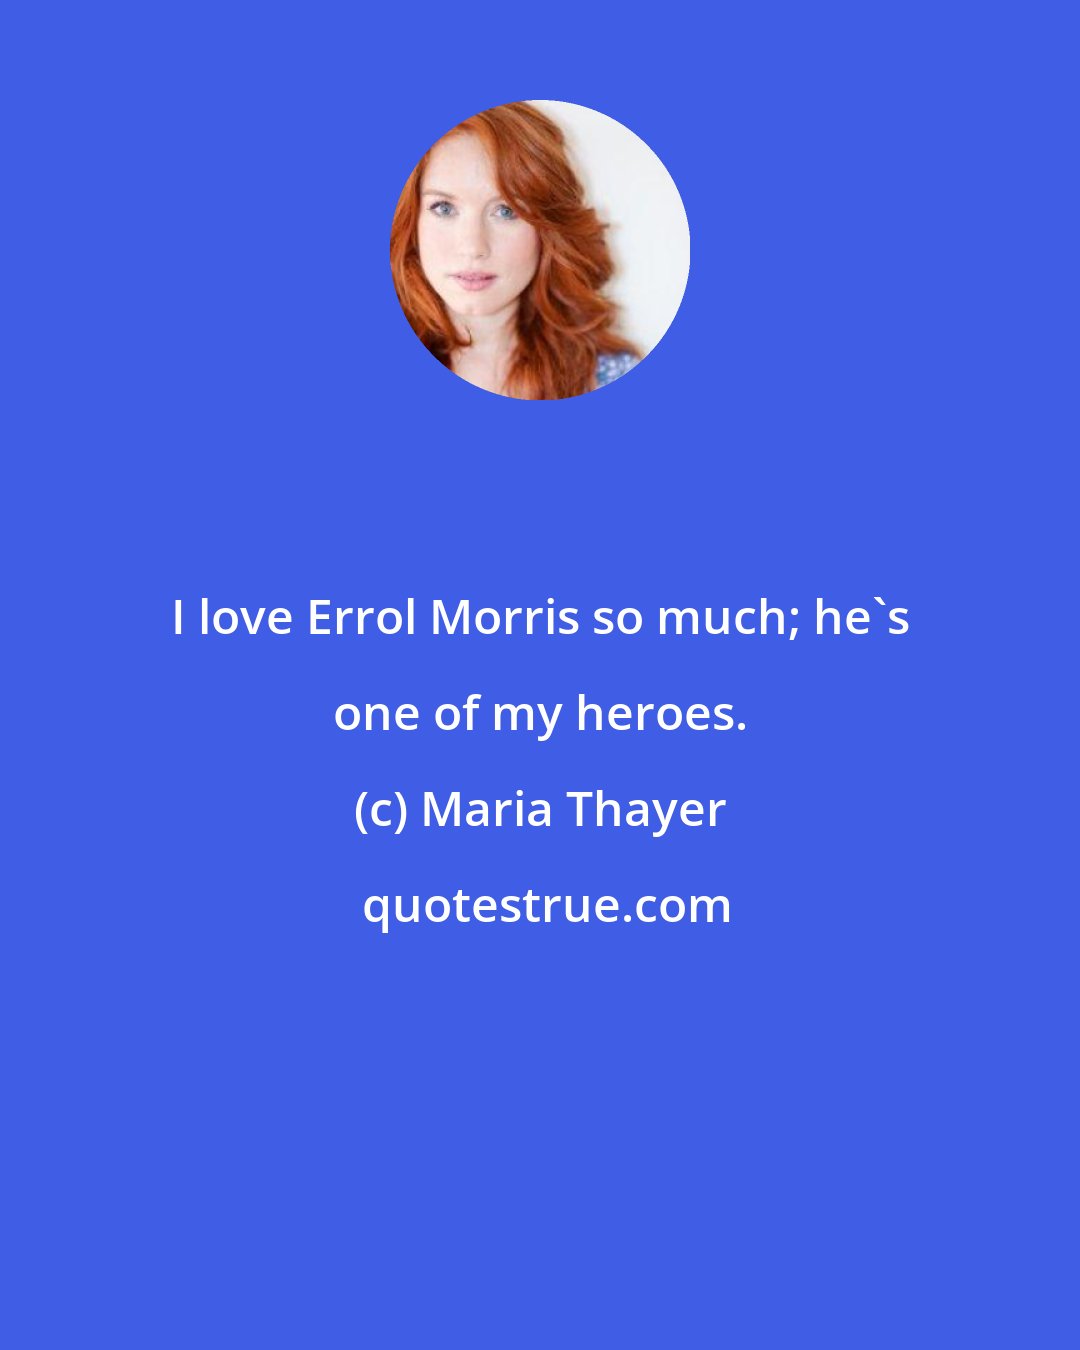 Maria Thayer: I love Errol Morris so much; he's one of my heroes.